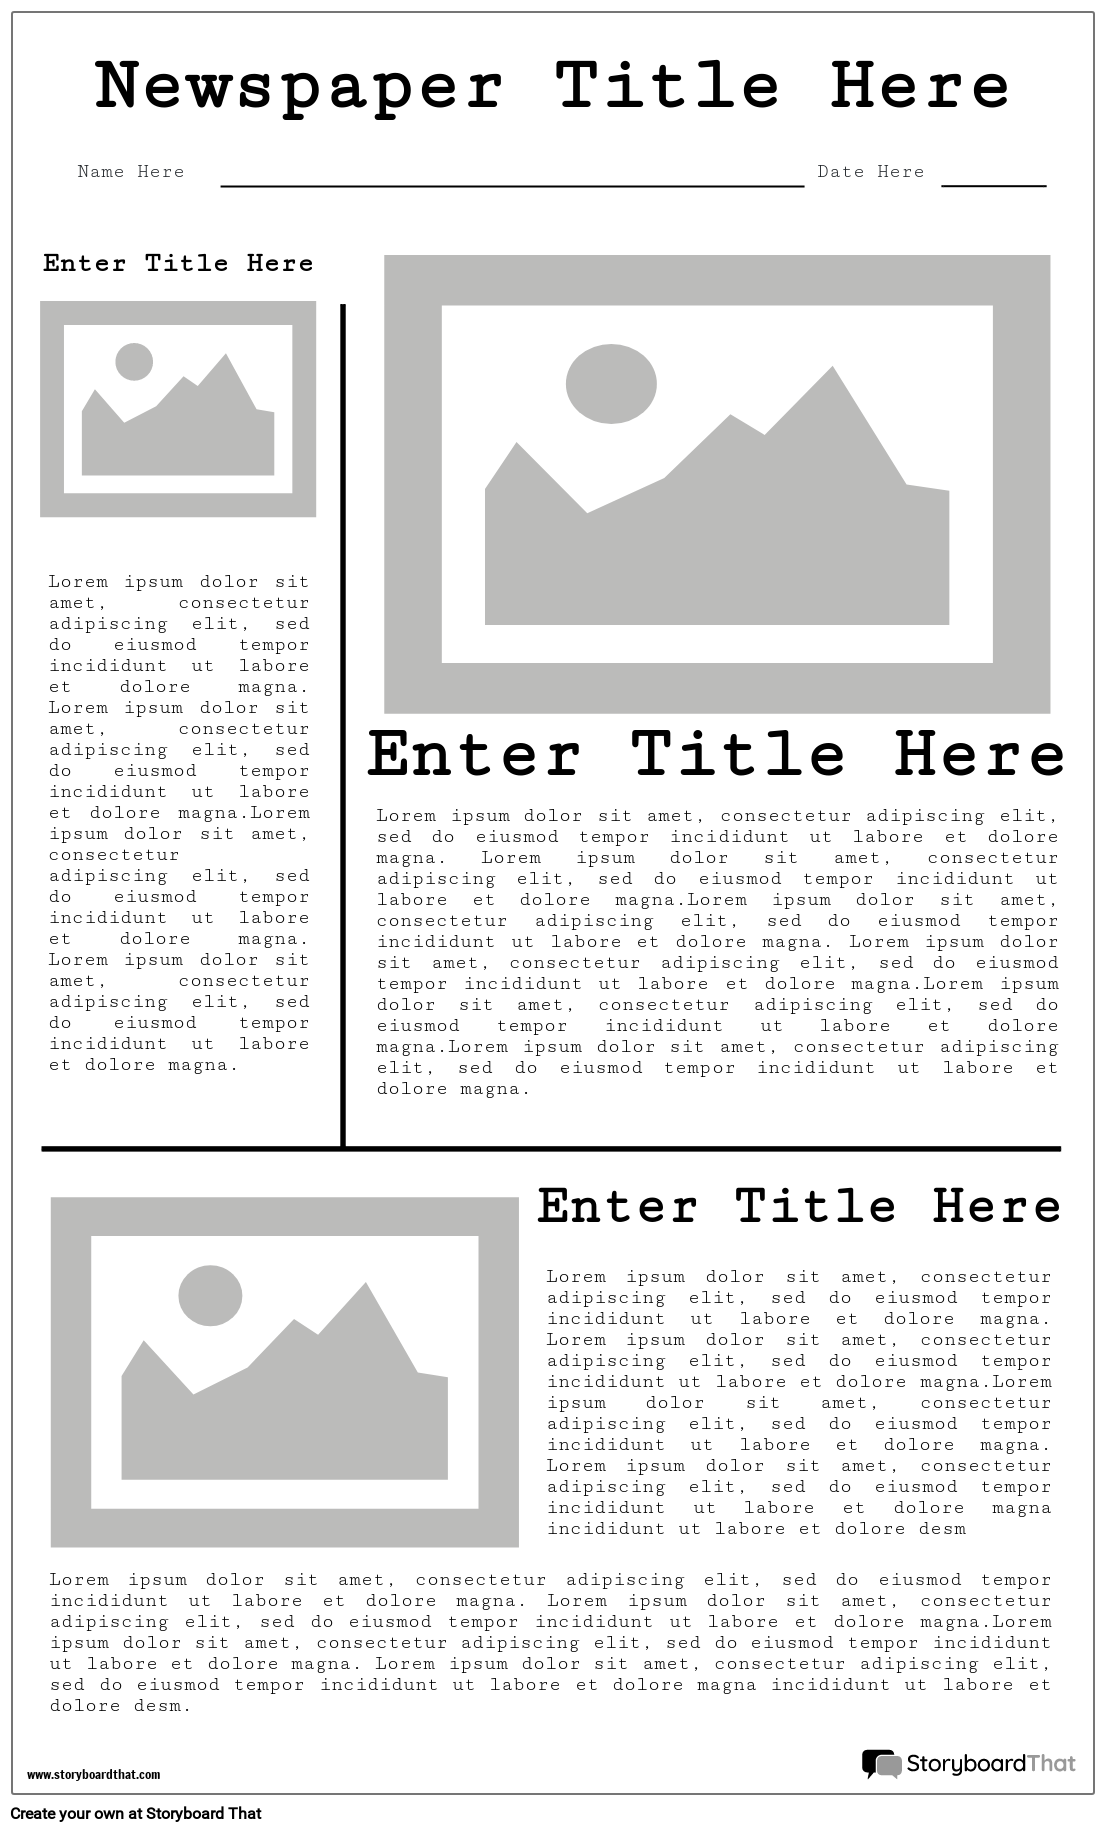 new-create-page-newspaper-template-1-storyboard